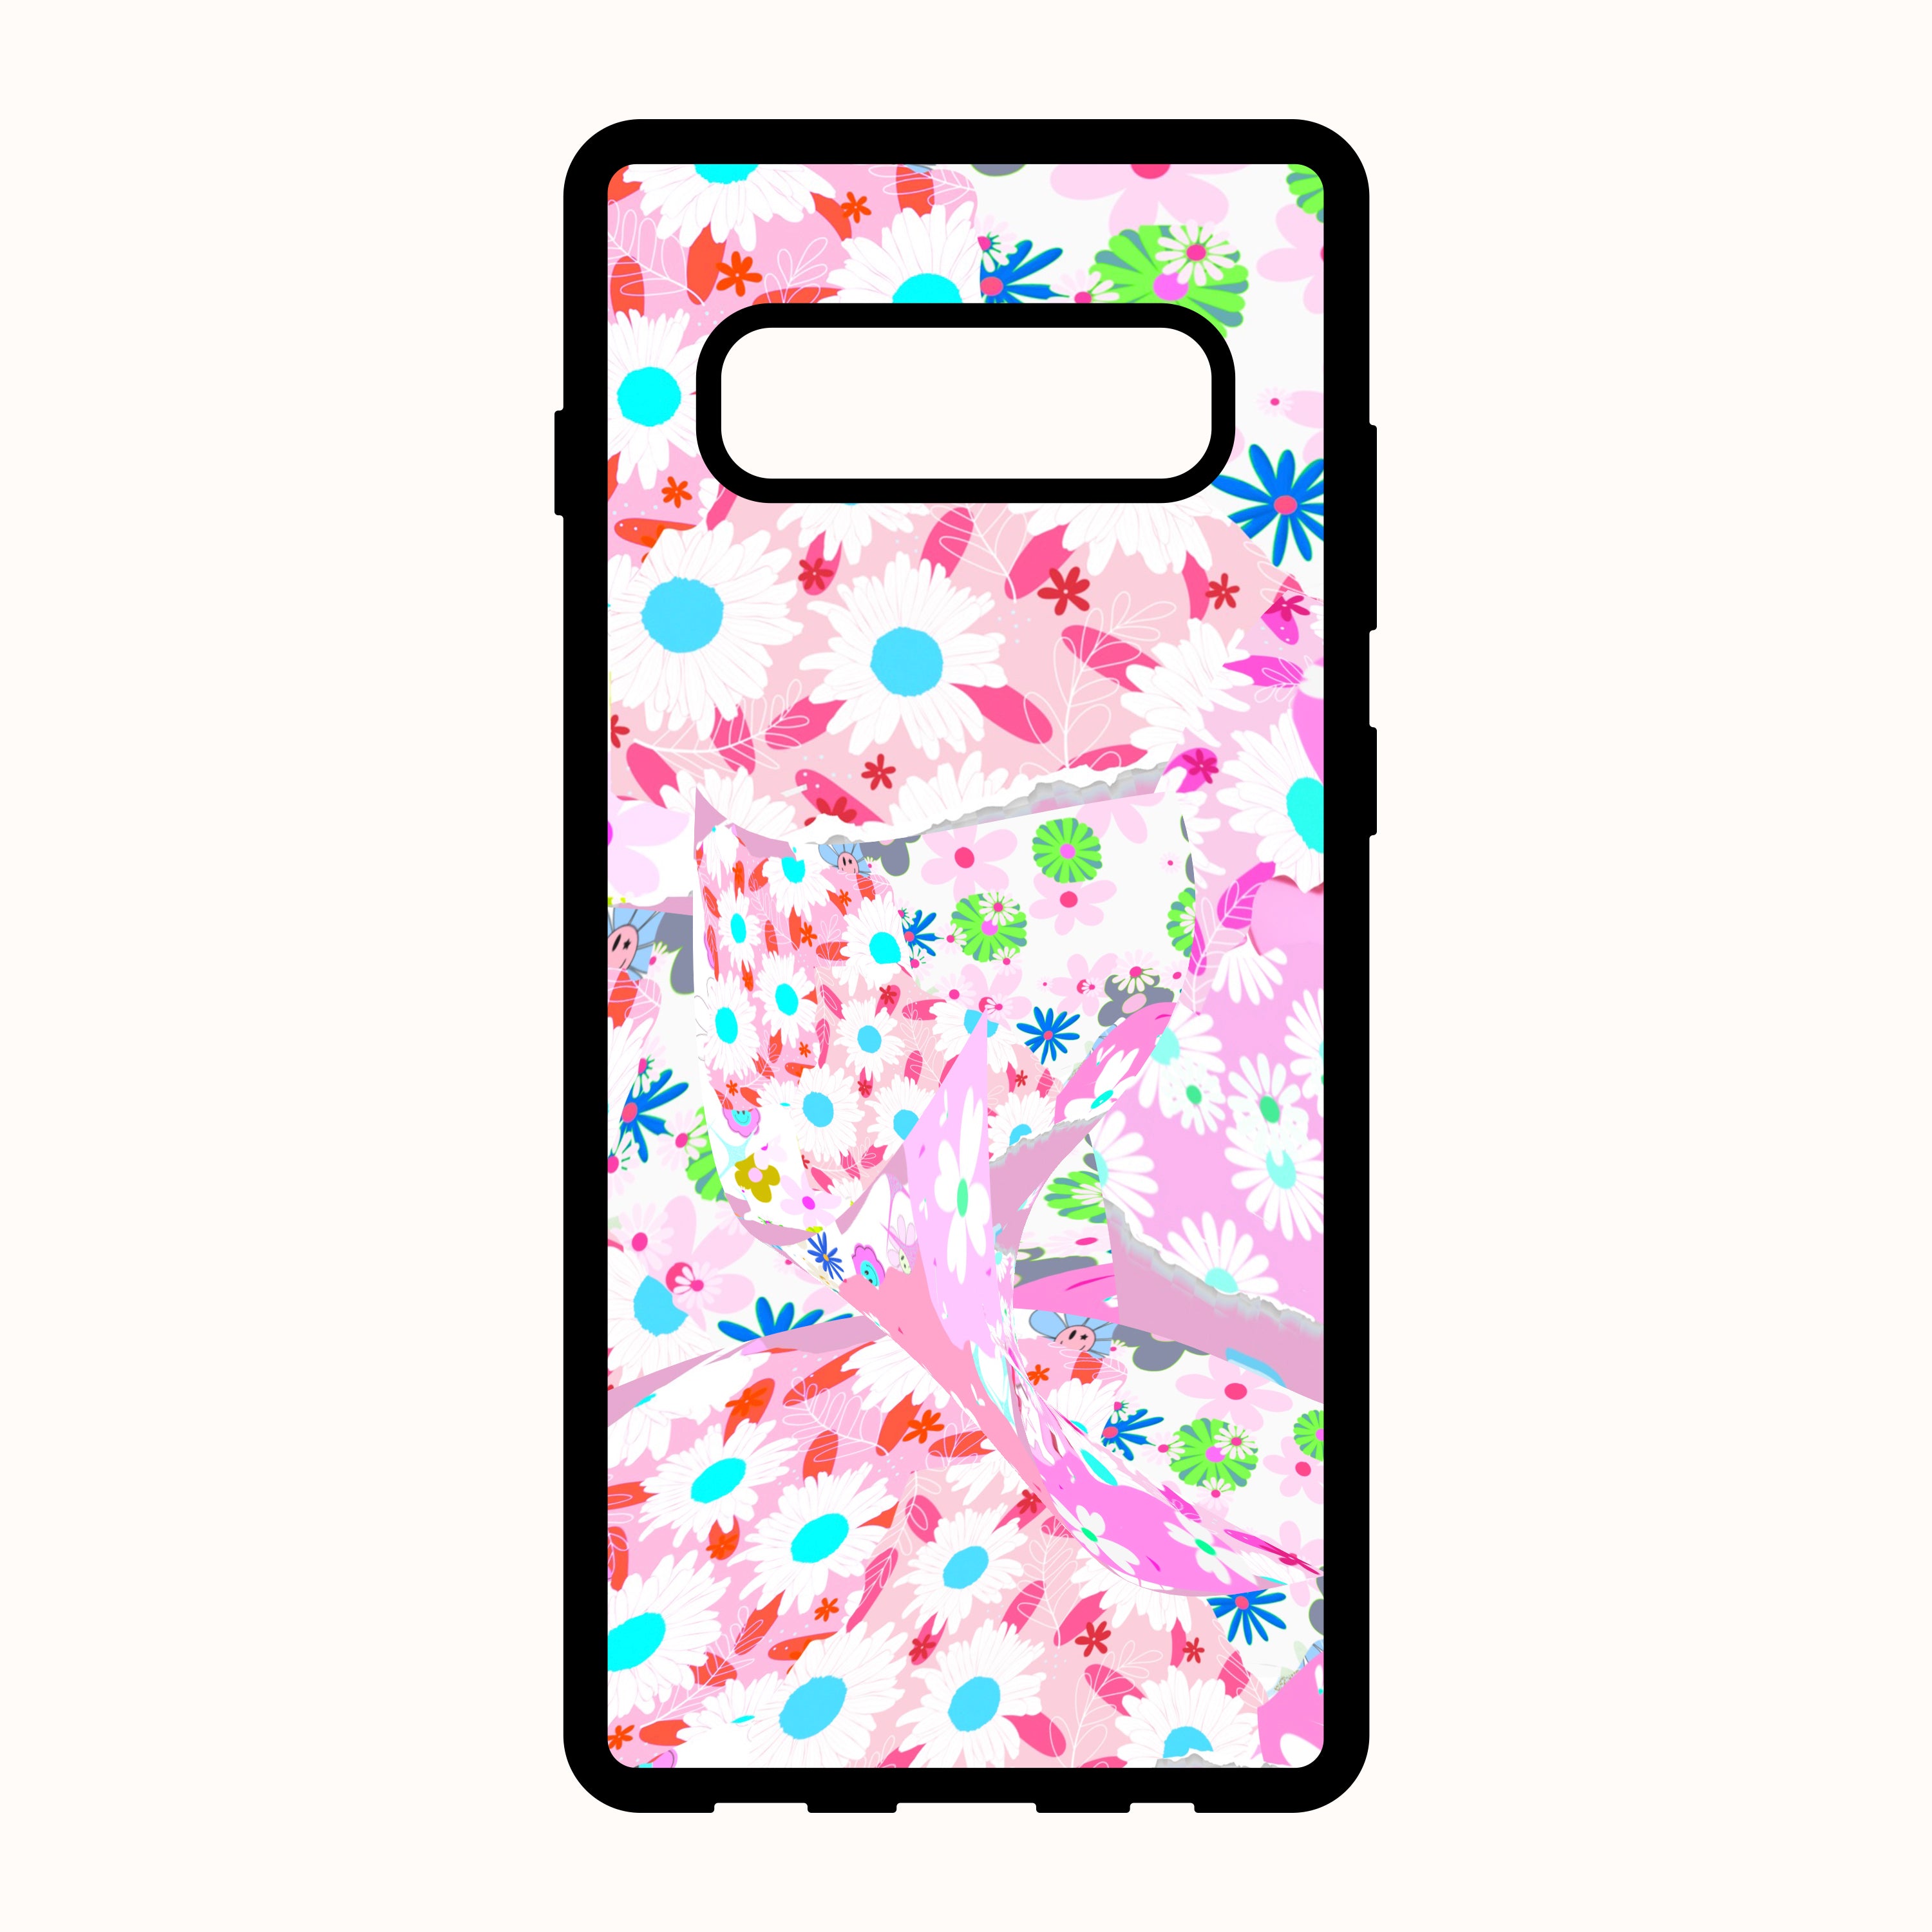 Samsung Galaxy Phone Case with Unique and Vibrant Abstract Design